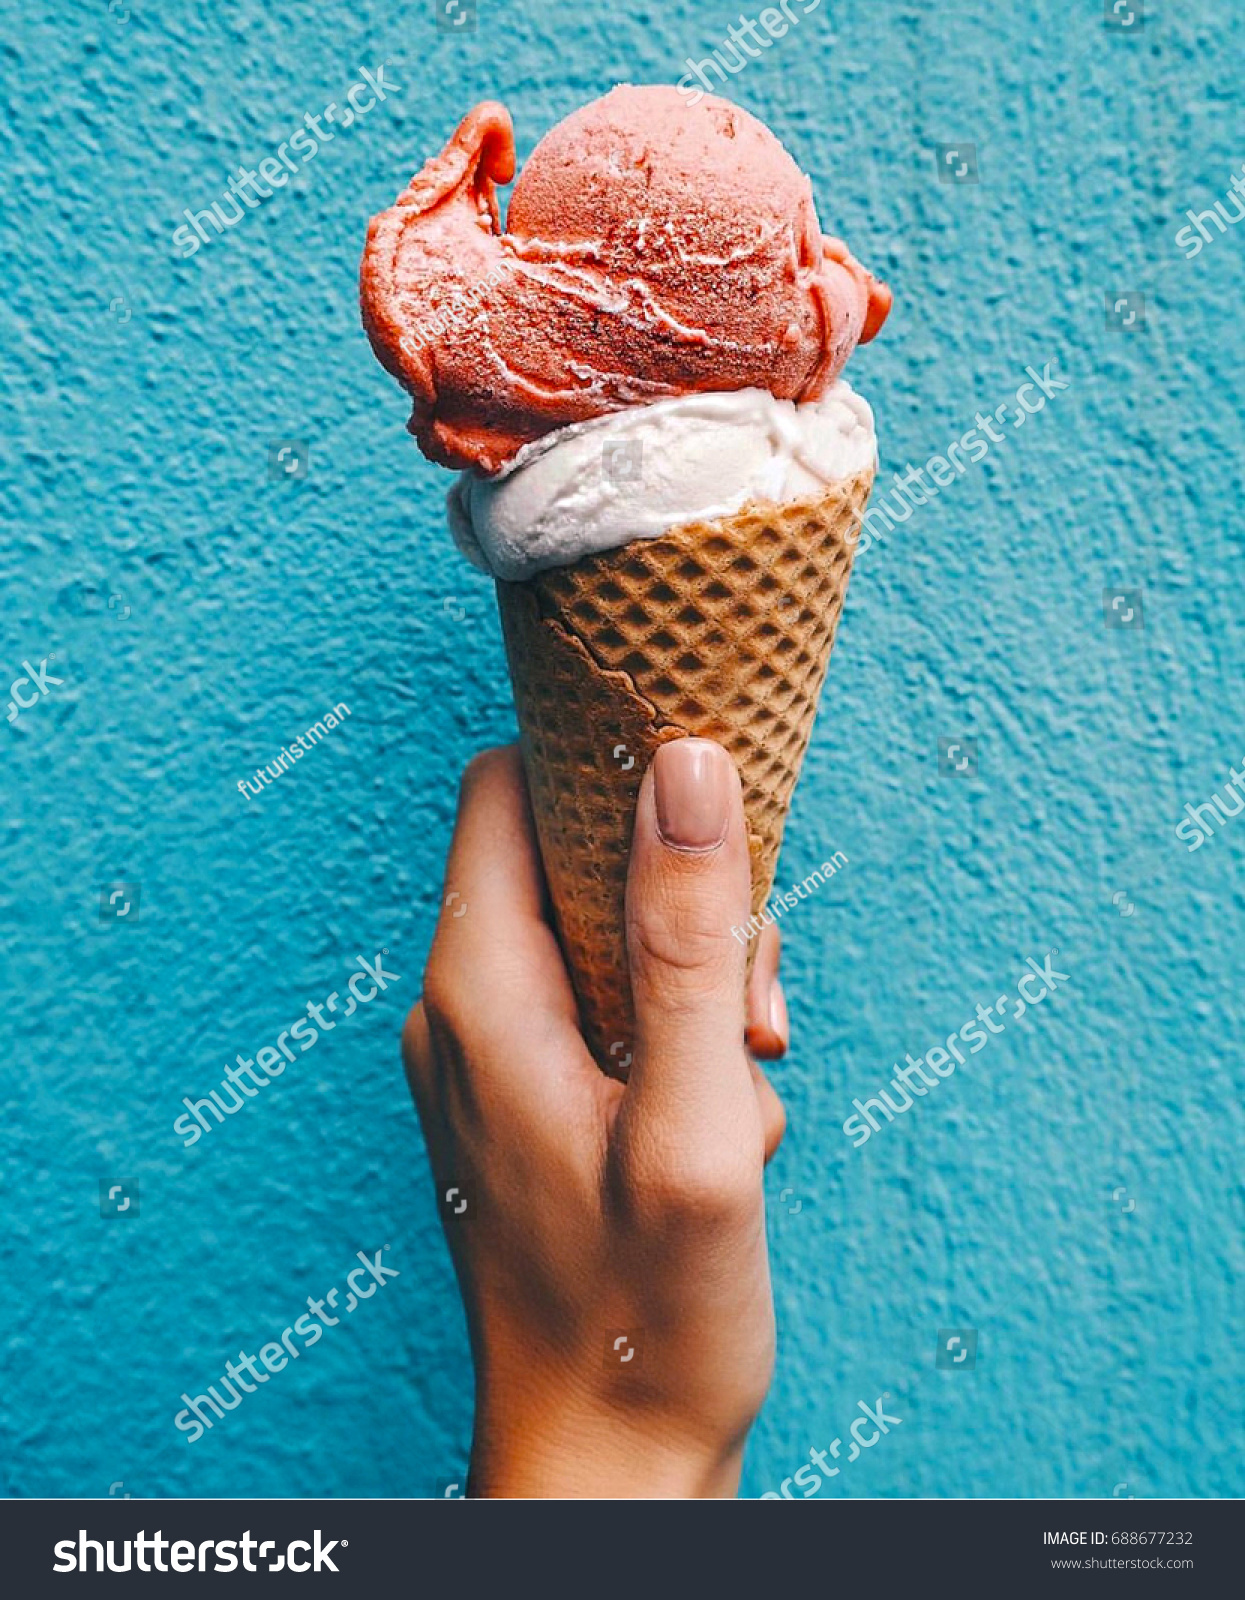 Ice cream cone on a blue background. The woman holding the ice cream by hand. #688677232